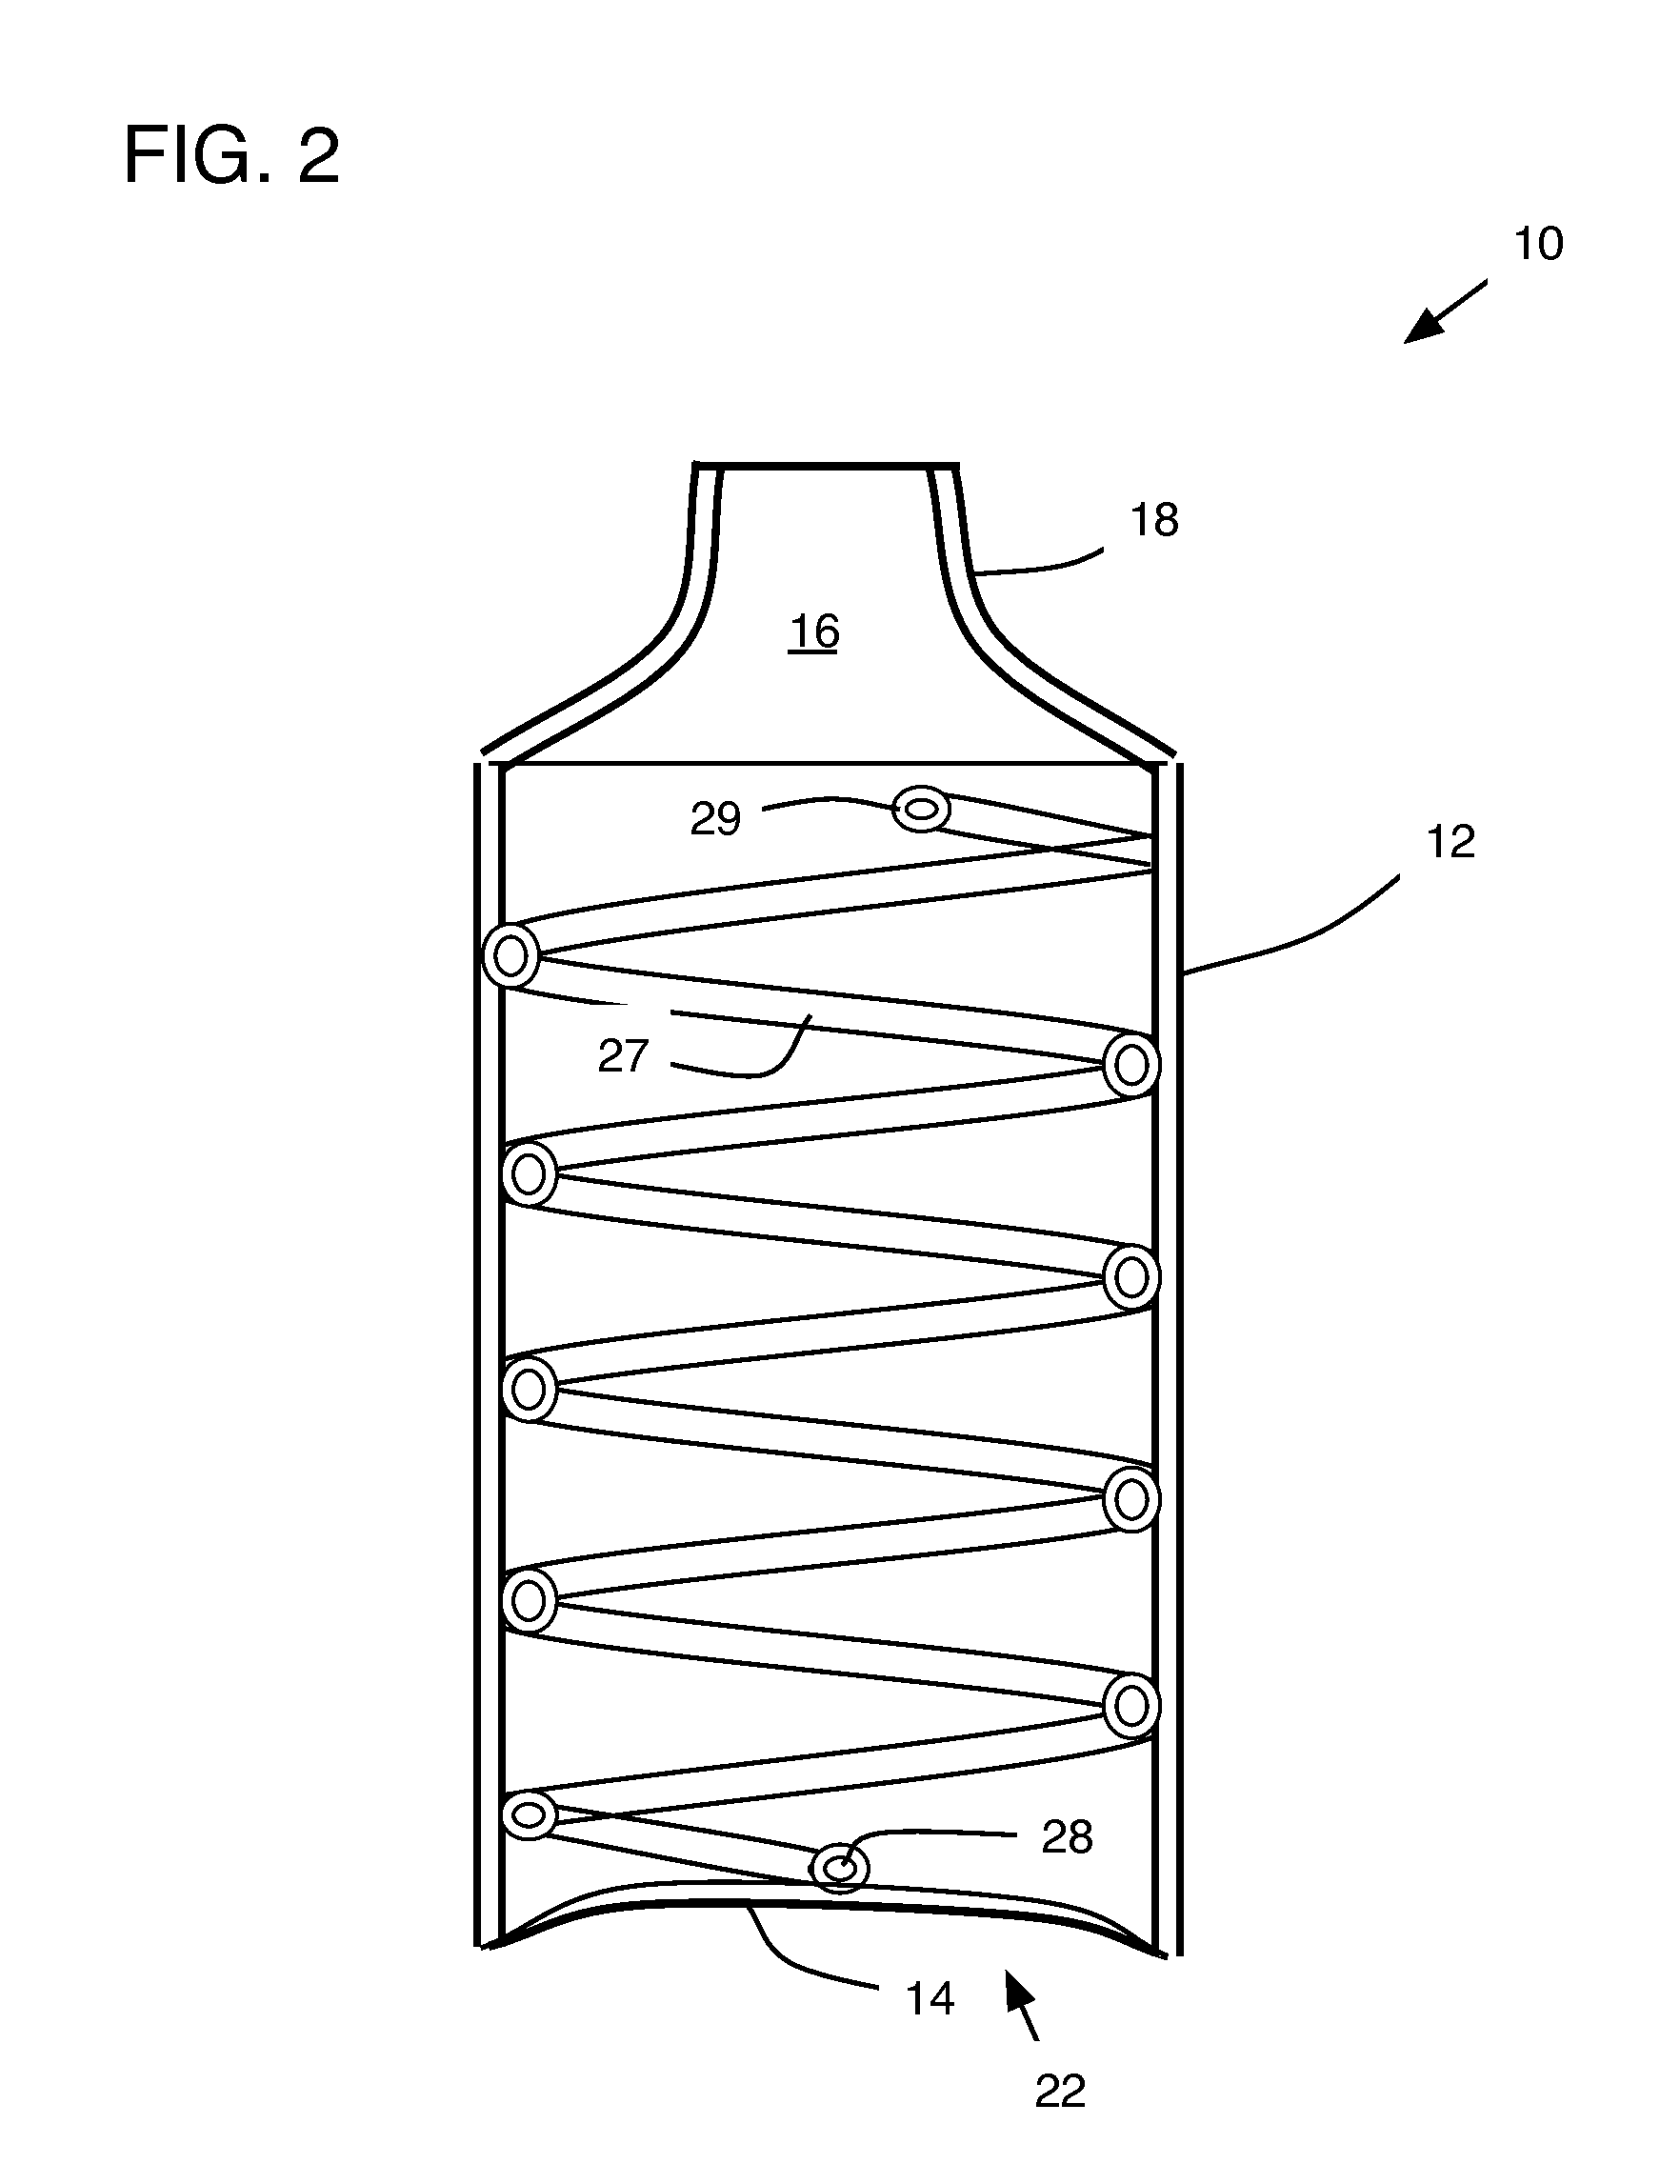 Sports Bottle and Fluid Dispensing system, device, and method.